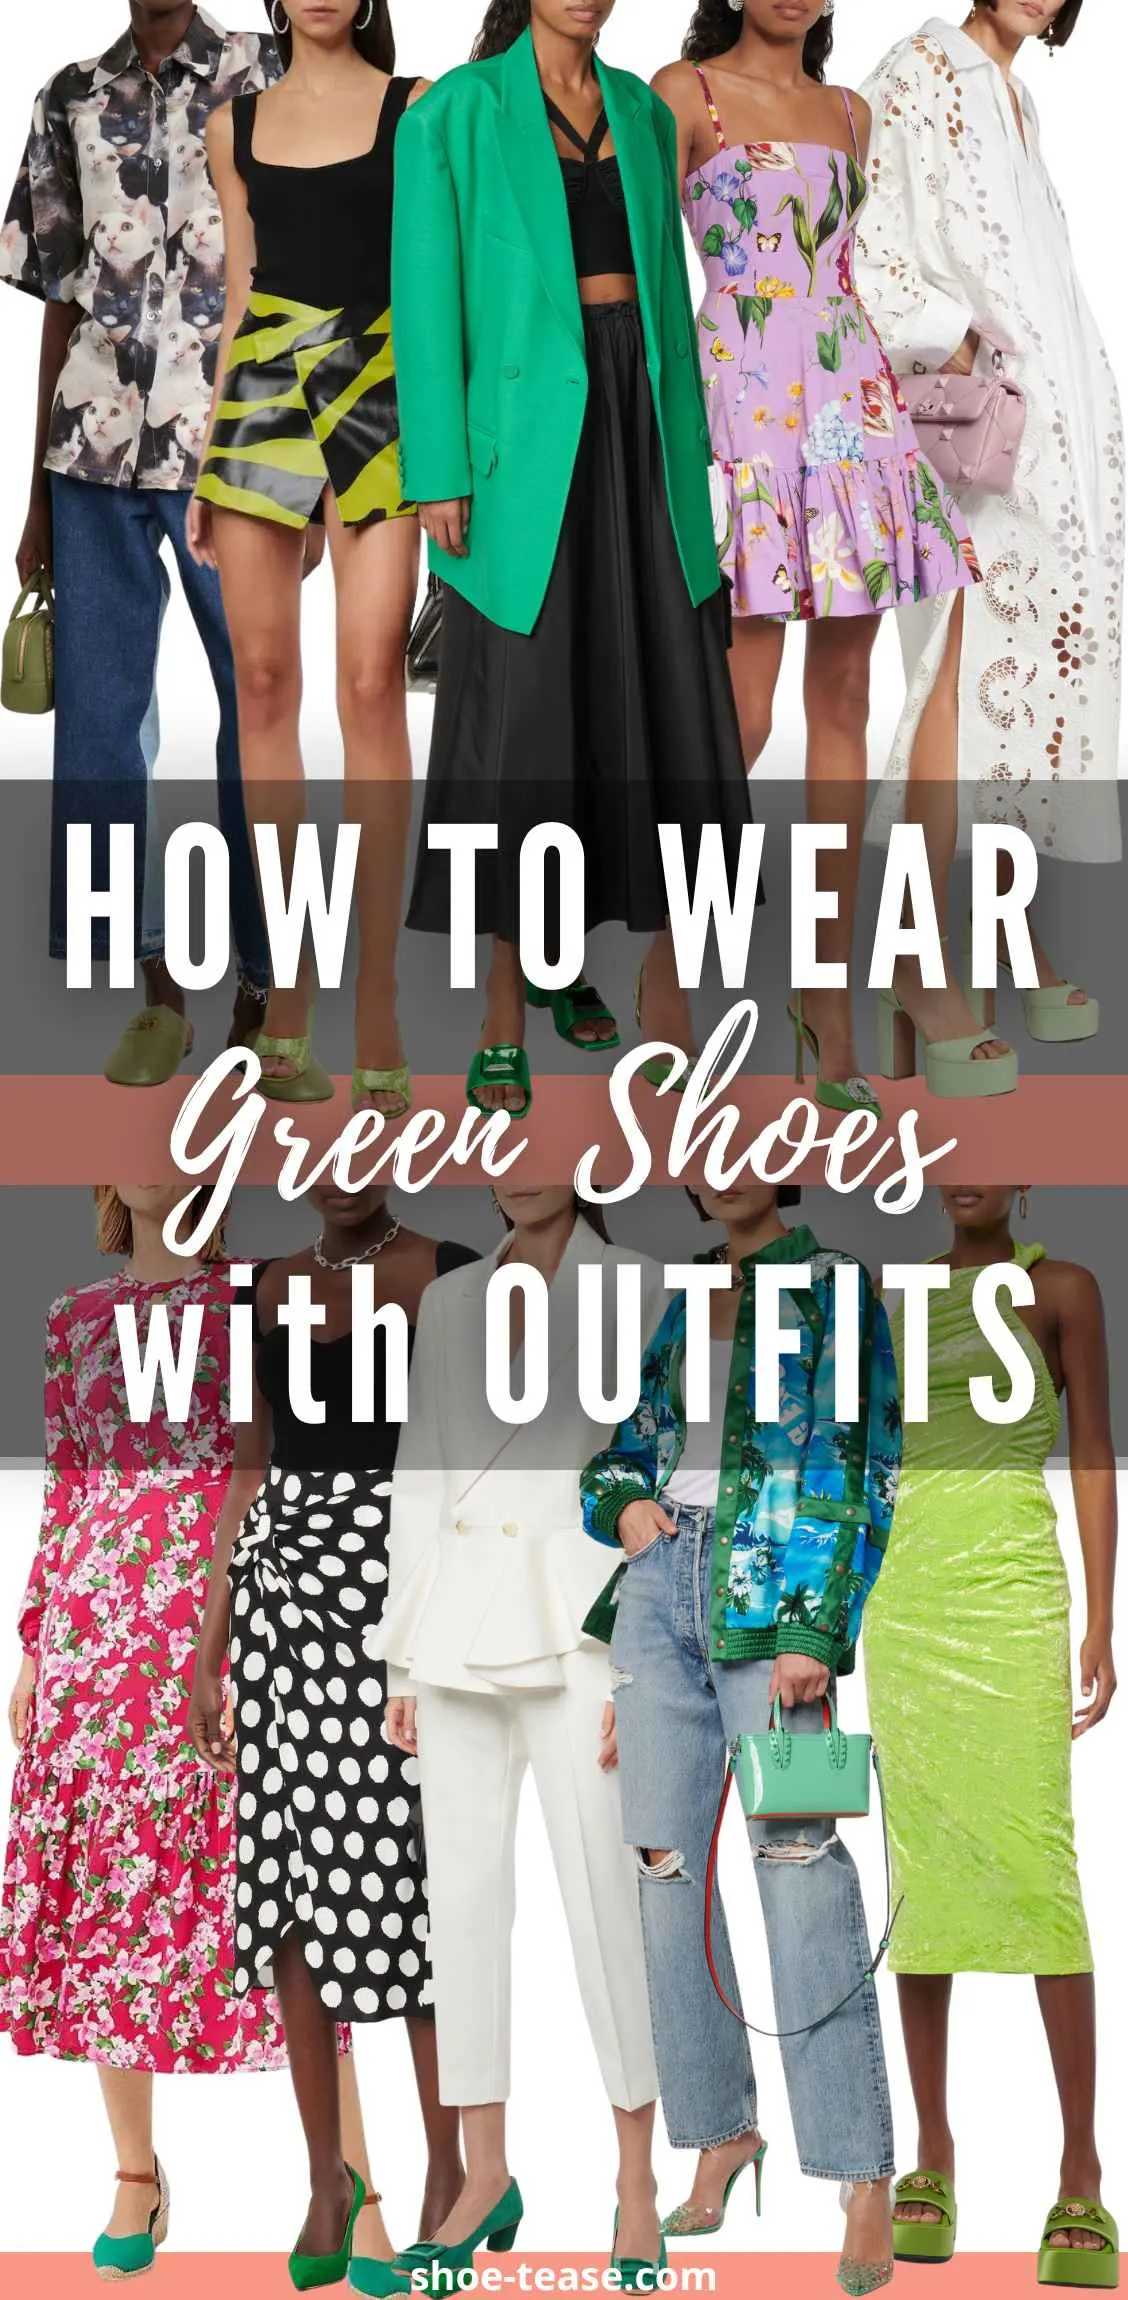 Collage of 10 women wearing different green shoes outfits with text reading how to wear green shoes with outfits.